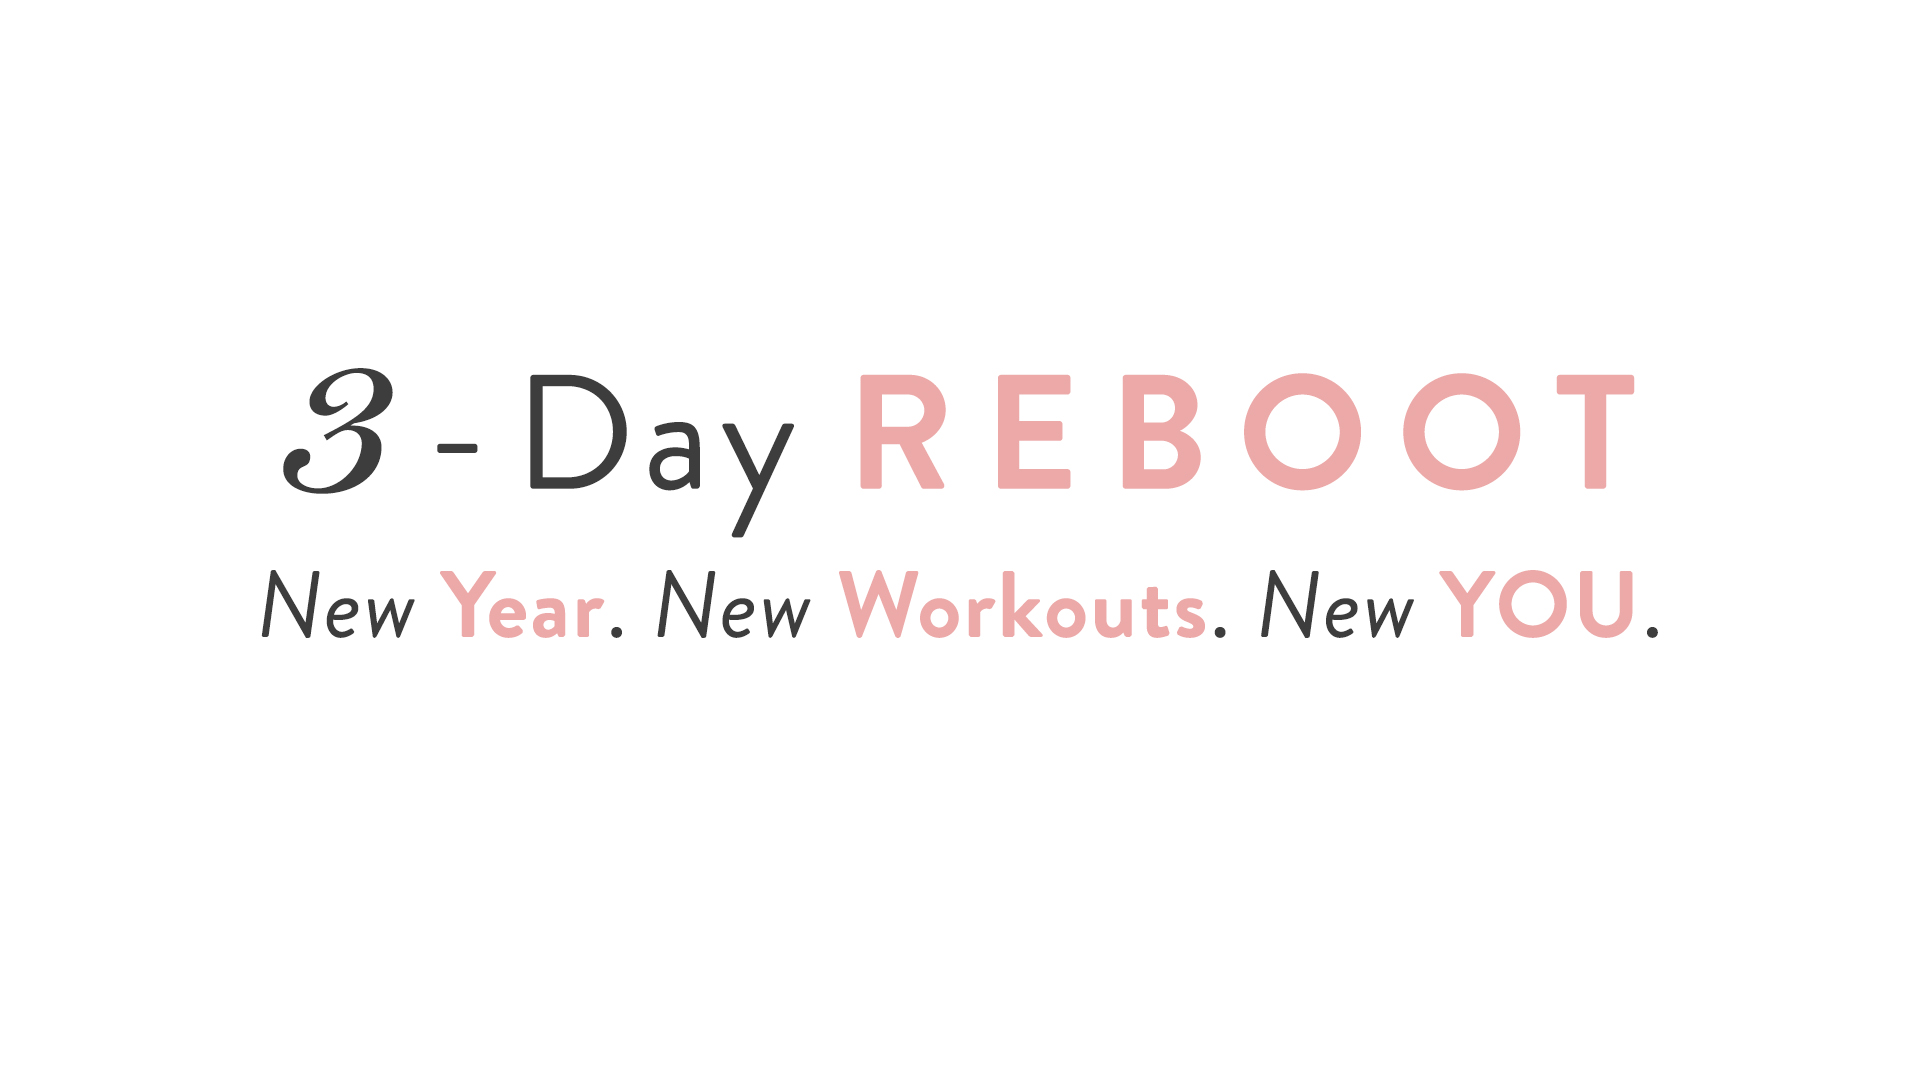 3-Day Reboot!